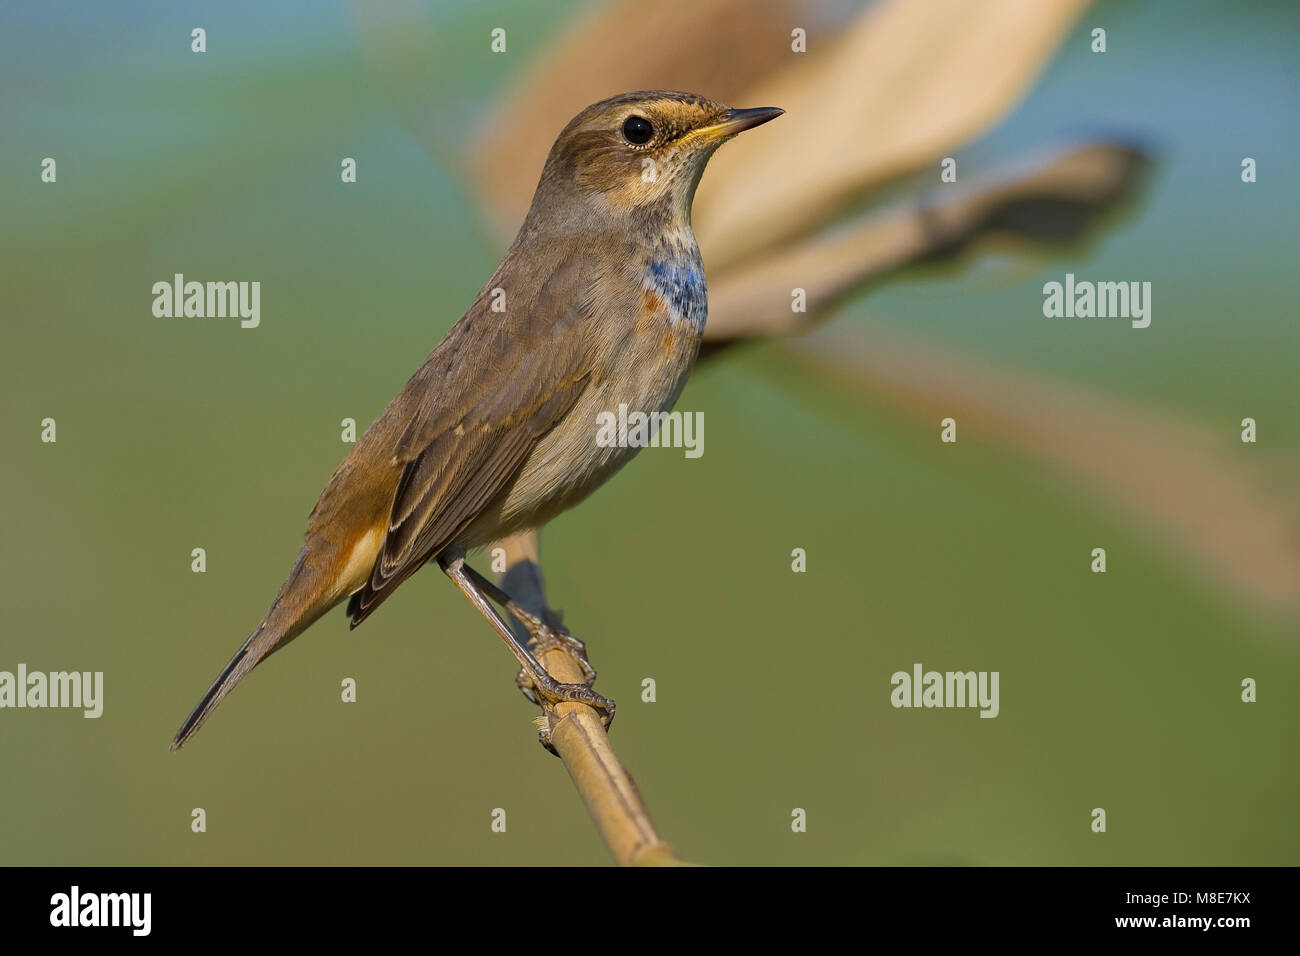 Blauwborst zittend op tak; White-Spotted Bluethroat perched on branch Stock Photo